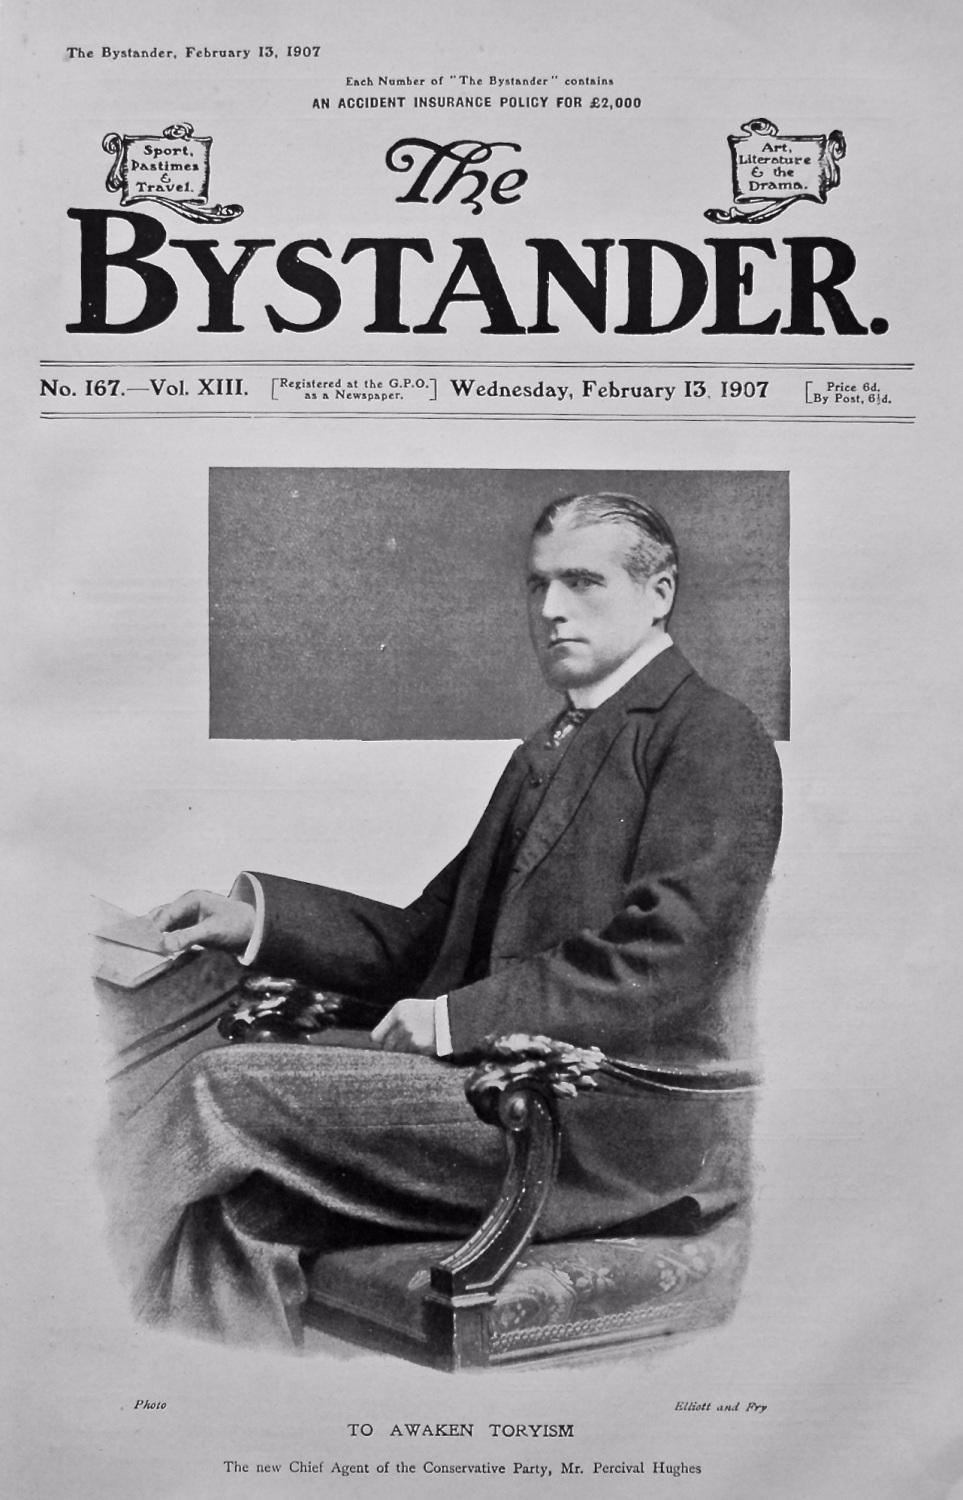 The Bystander, February 13th, 1907. (Front Page)   To Awaken Toryism.